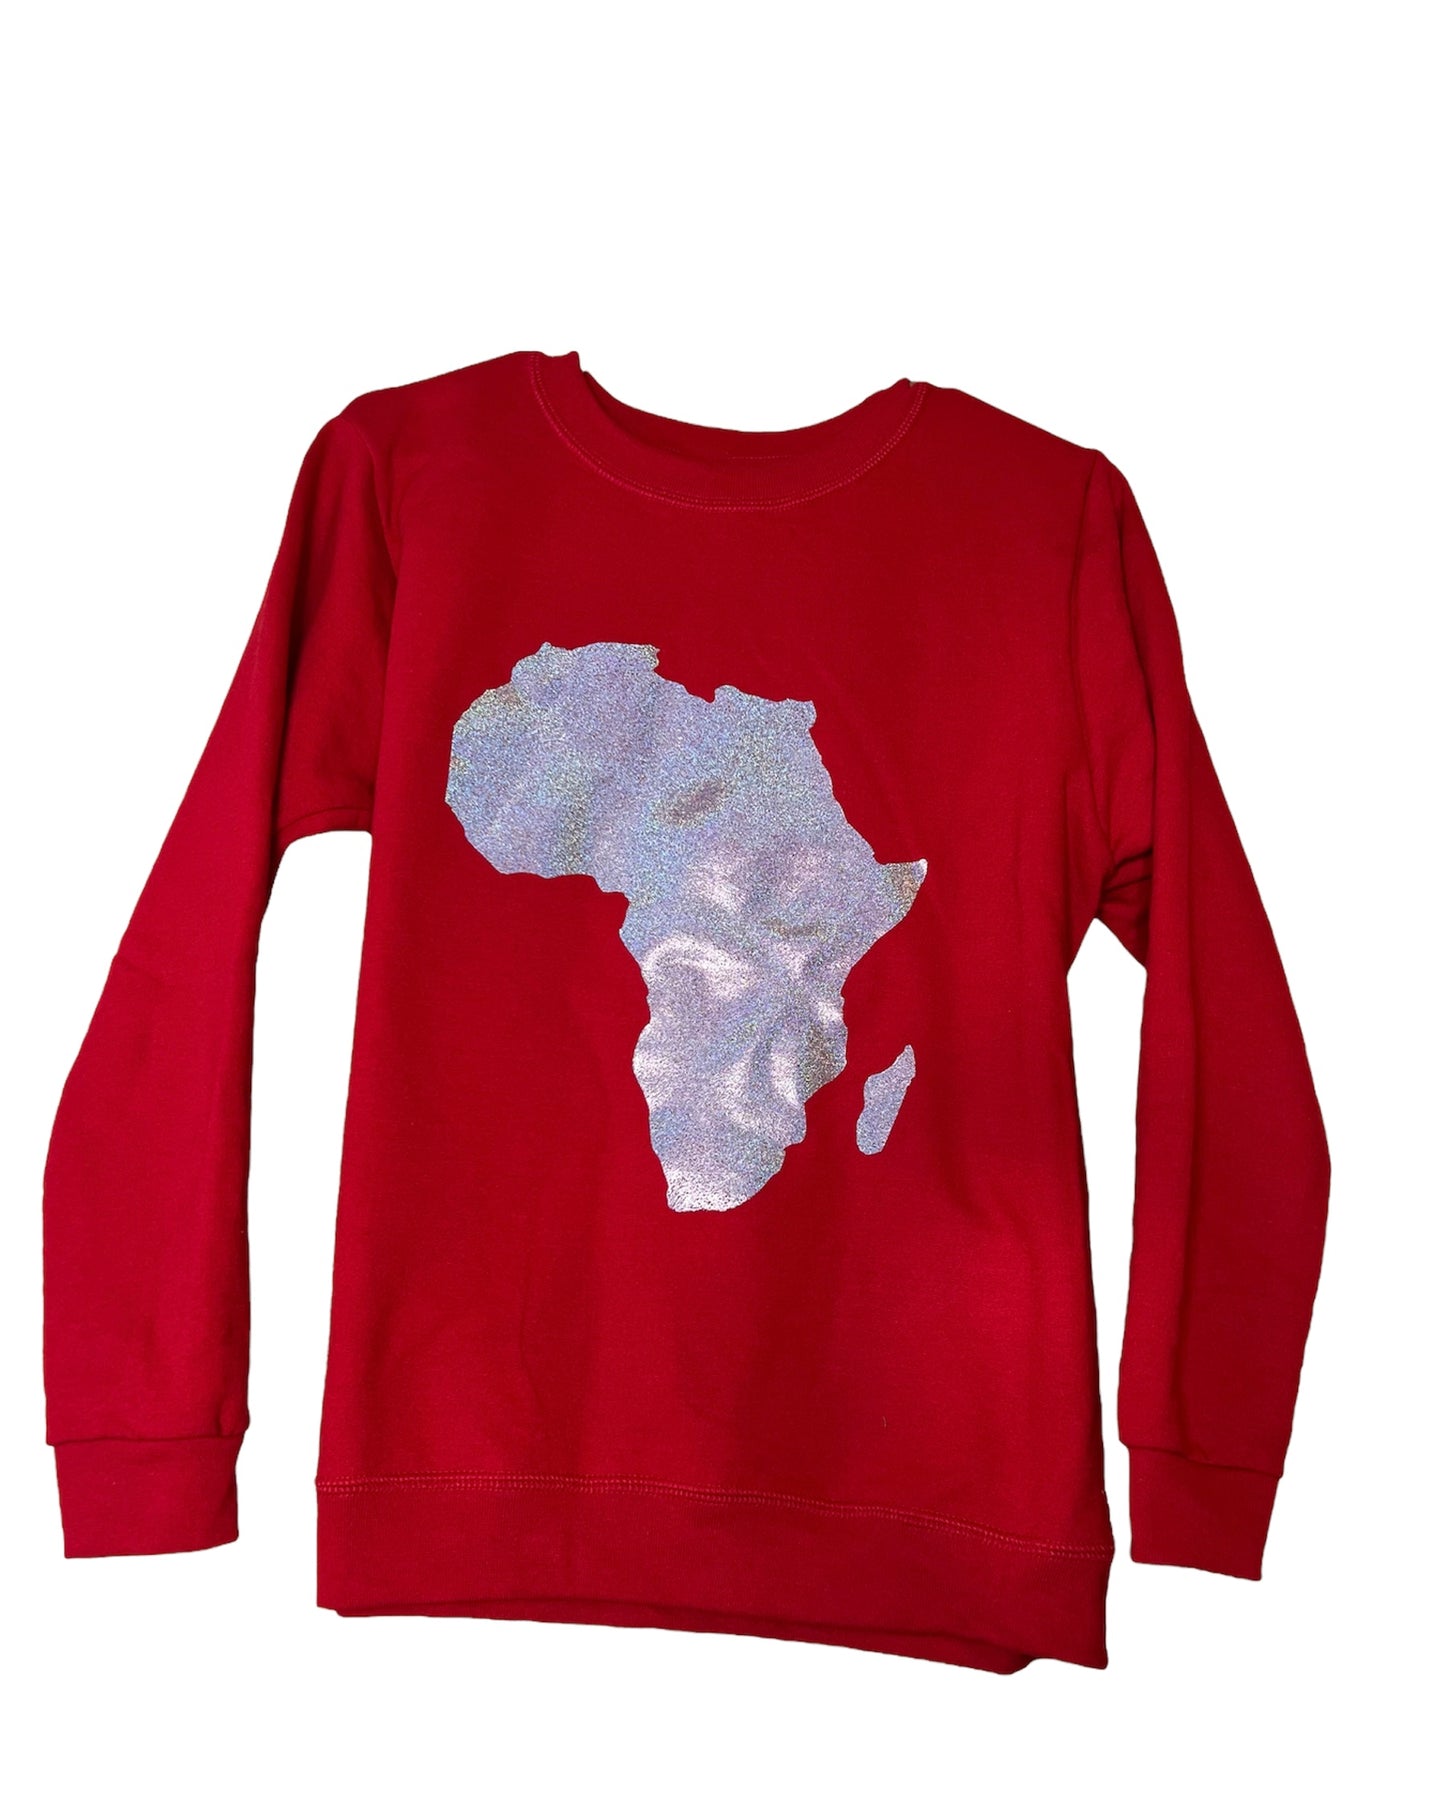 Long sleeve Sweatshirt with Silver African Map in Red and Blue